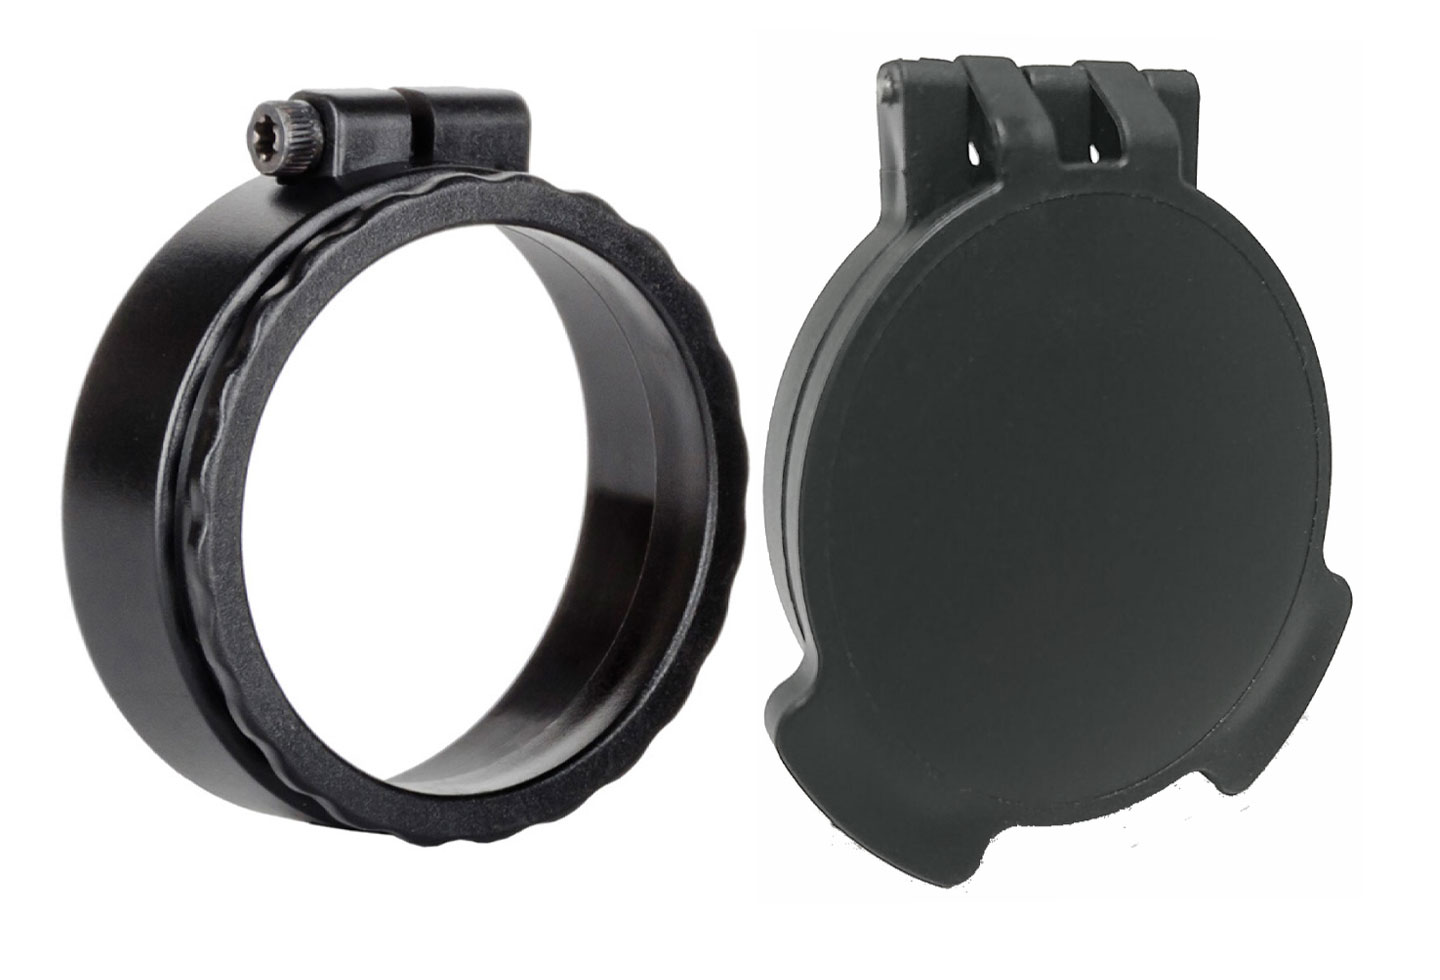 Trijicon MRO Flip Cover with Adapter Ring-Objective